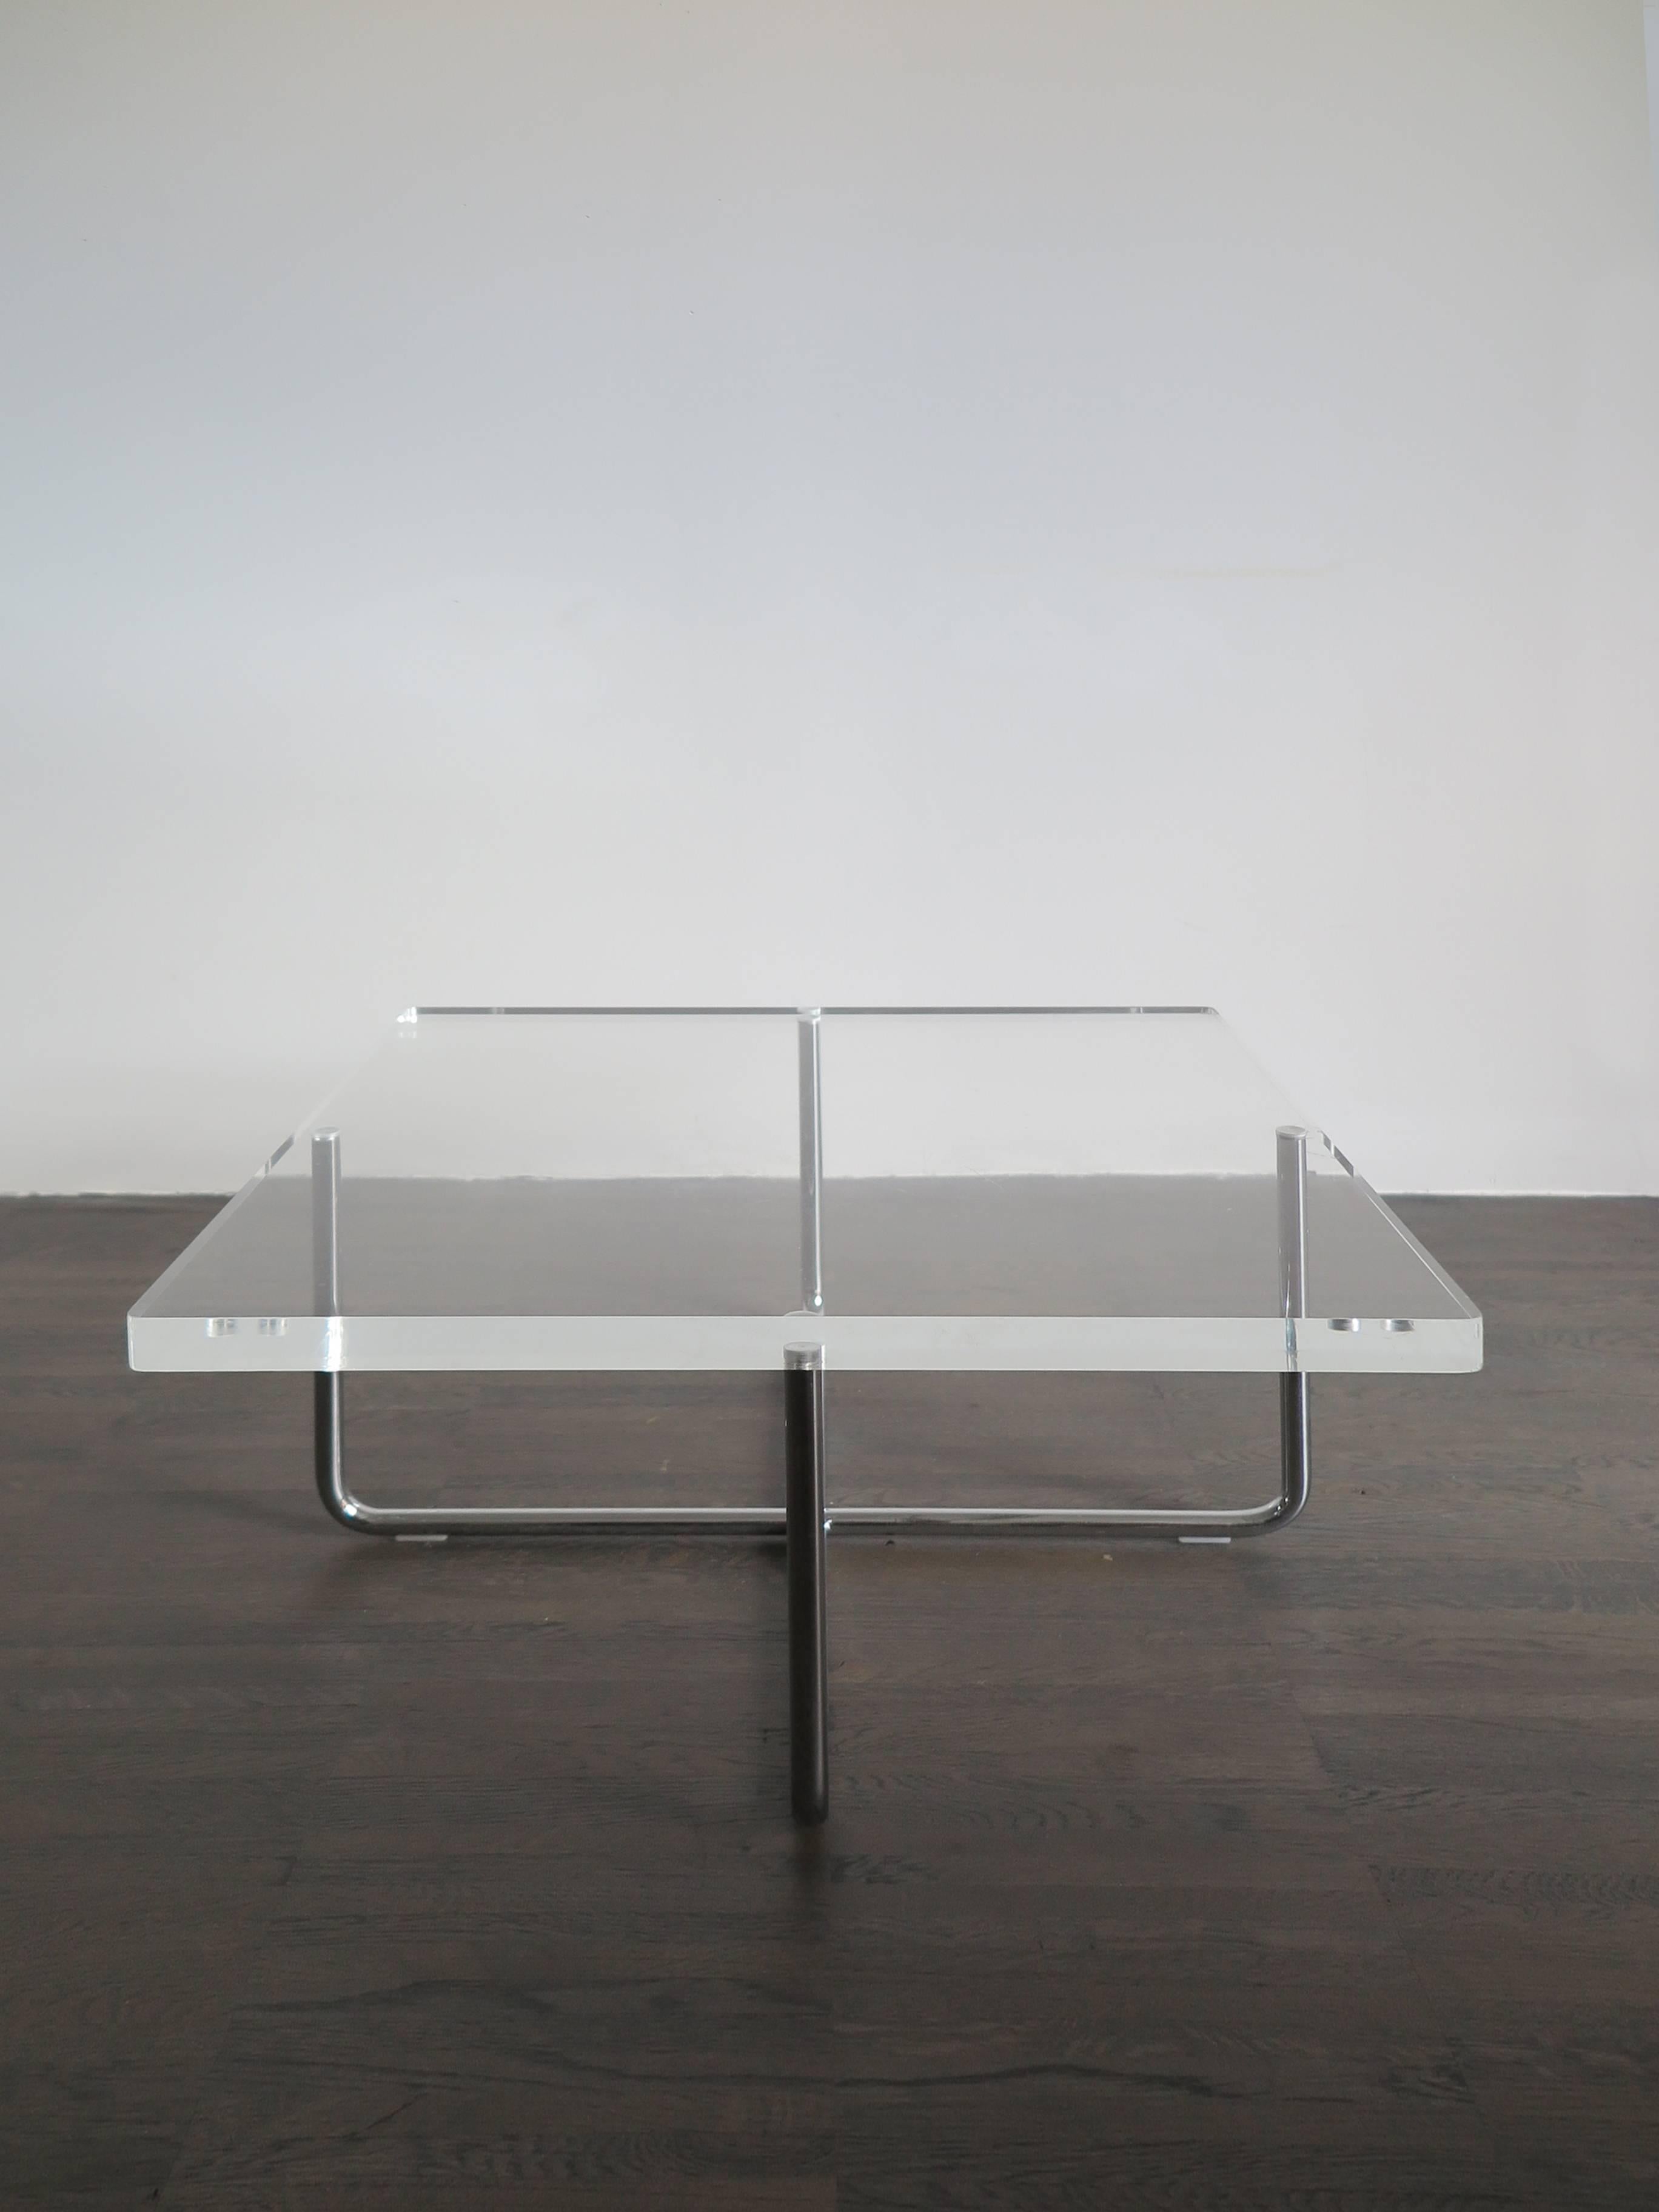 Italian square modern coffee table or sofa table manufactured by Minotti, with plexiglass top and frame in chromed metal with glossy chrome finish, circa 1990s.